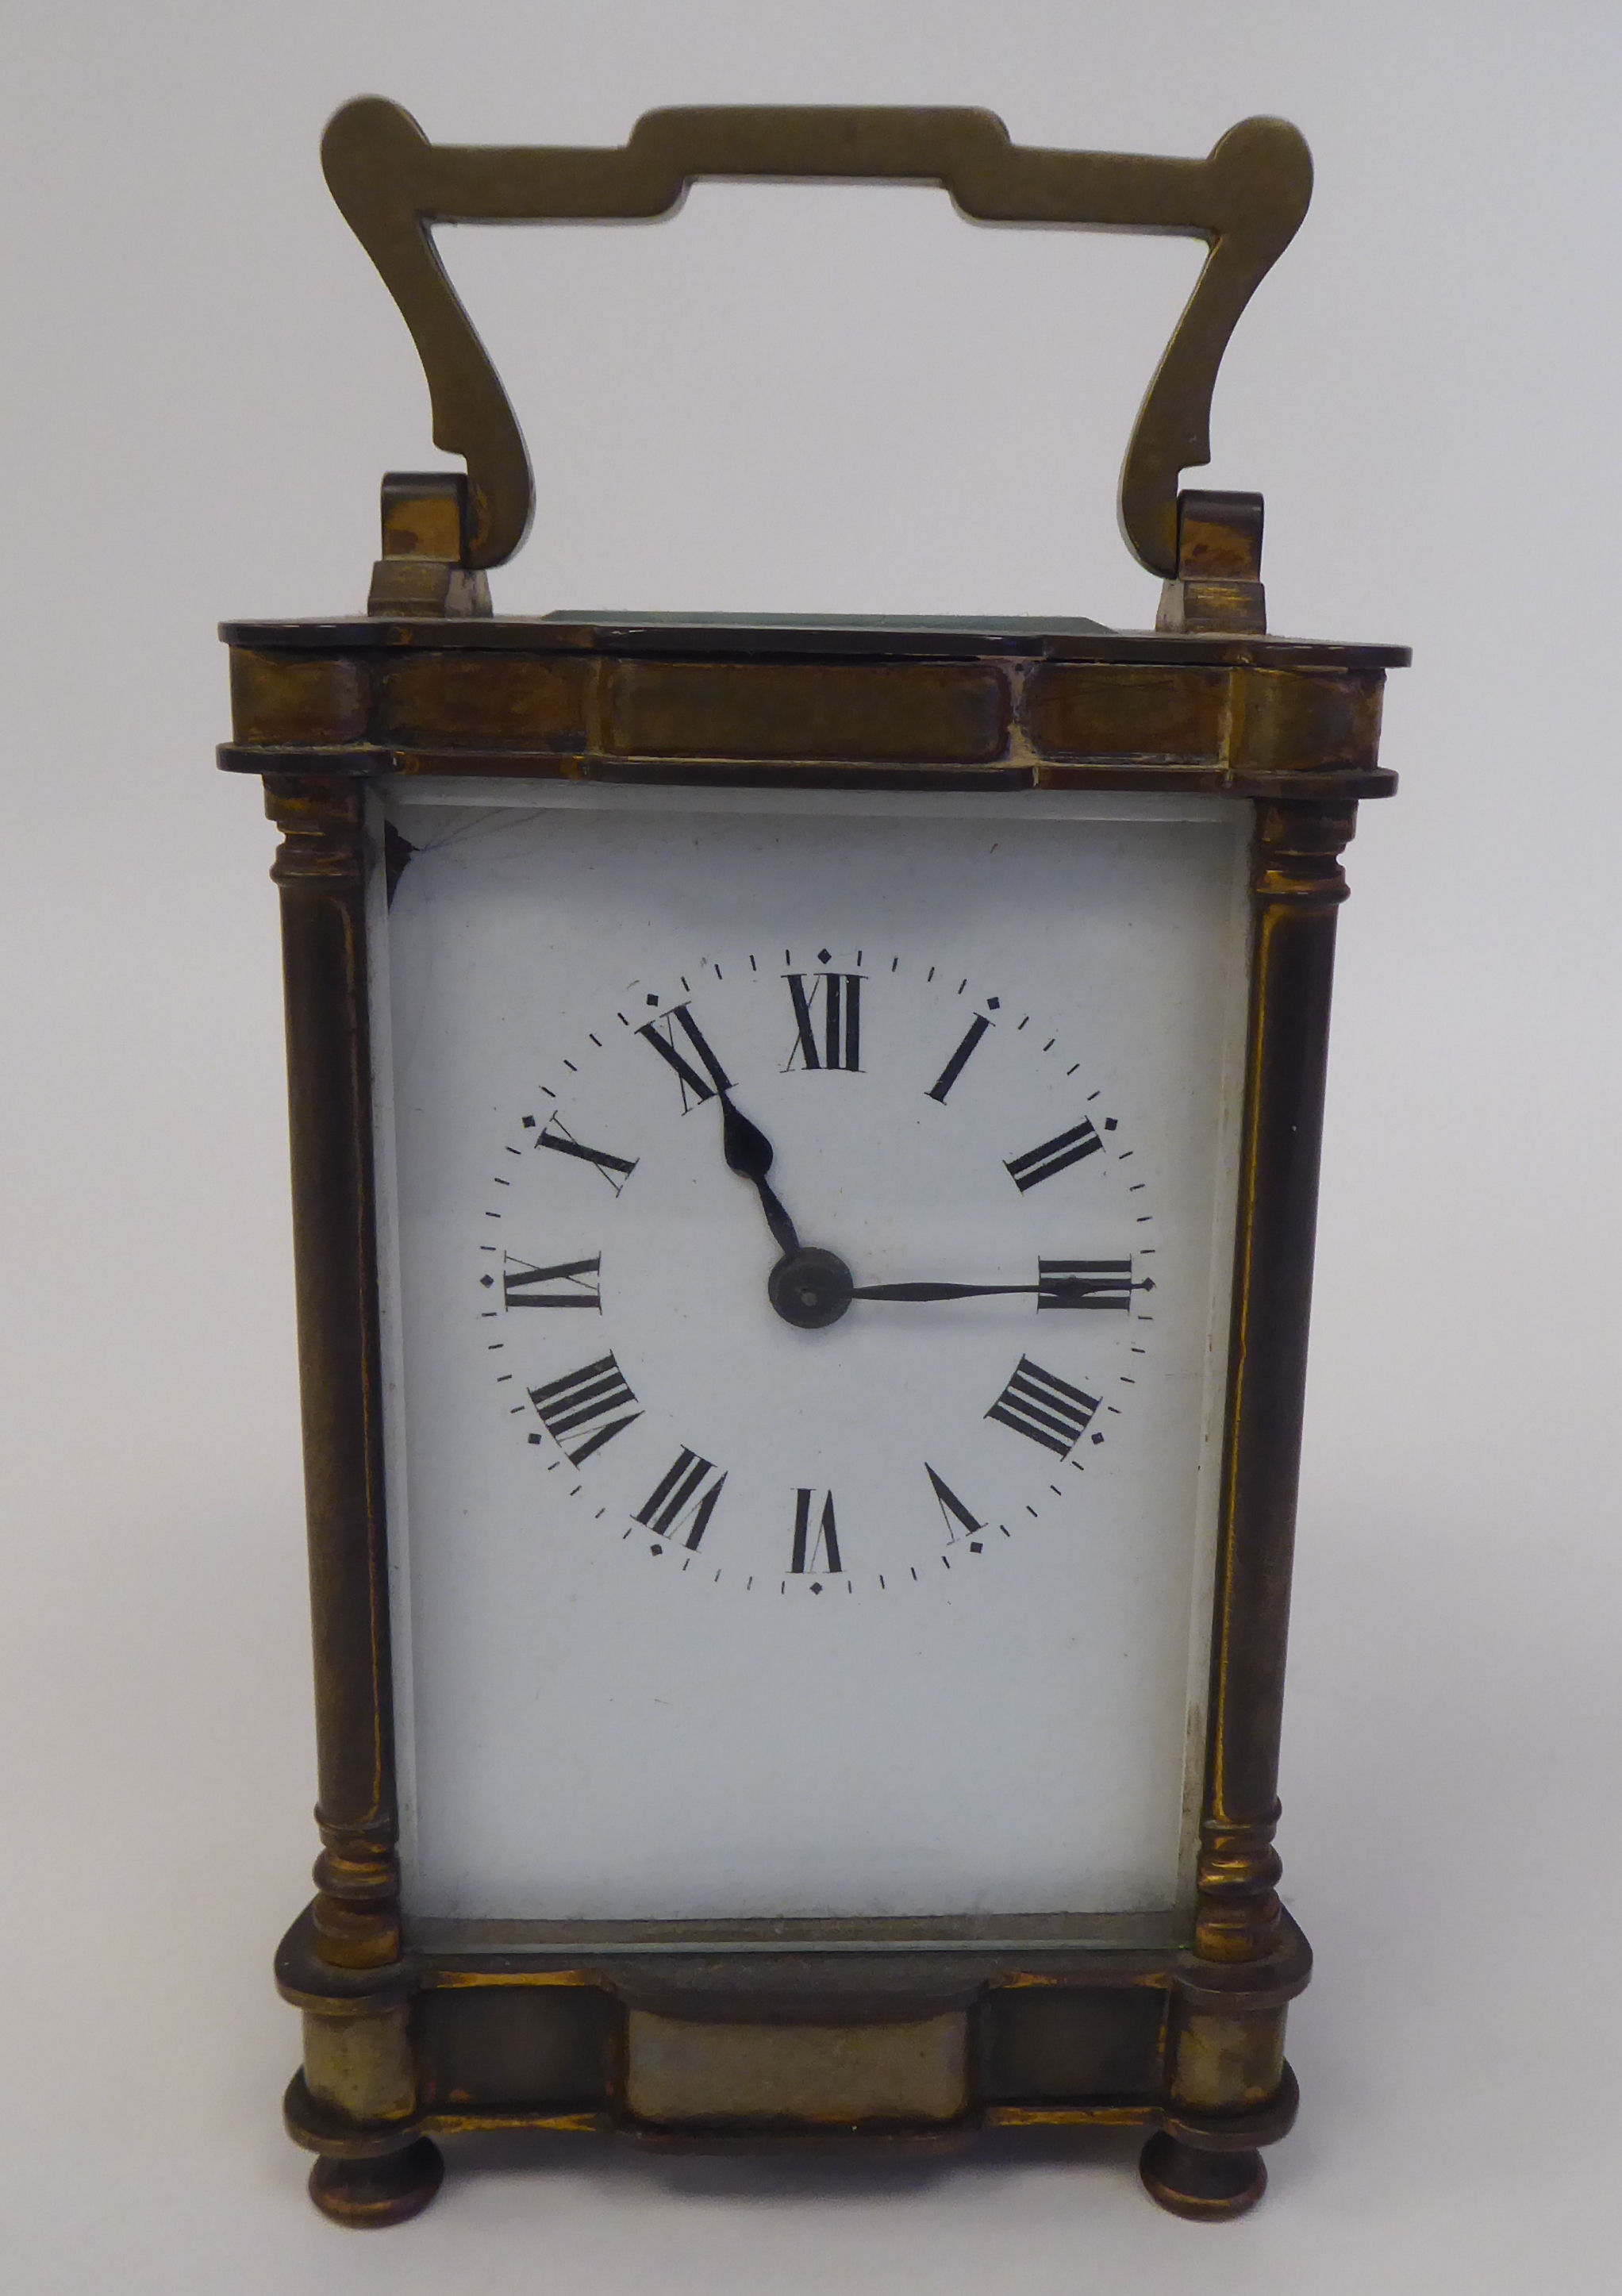 A 1920s lacquered brass cased carriage timepiece with bevelled glass panels and a folding top